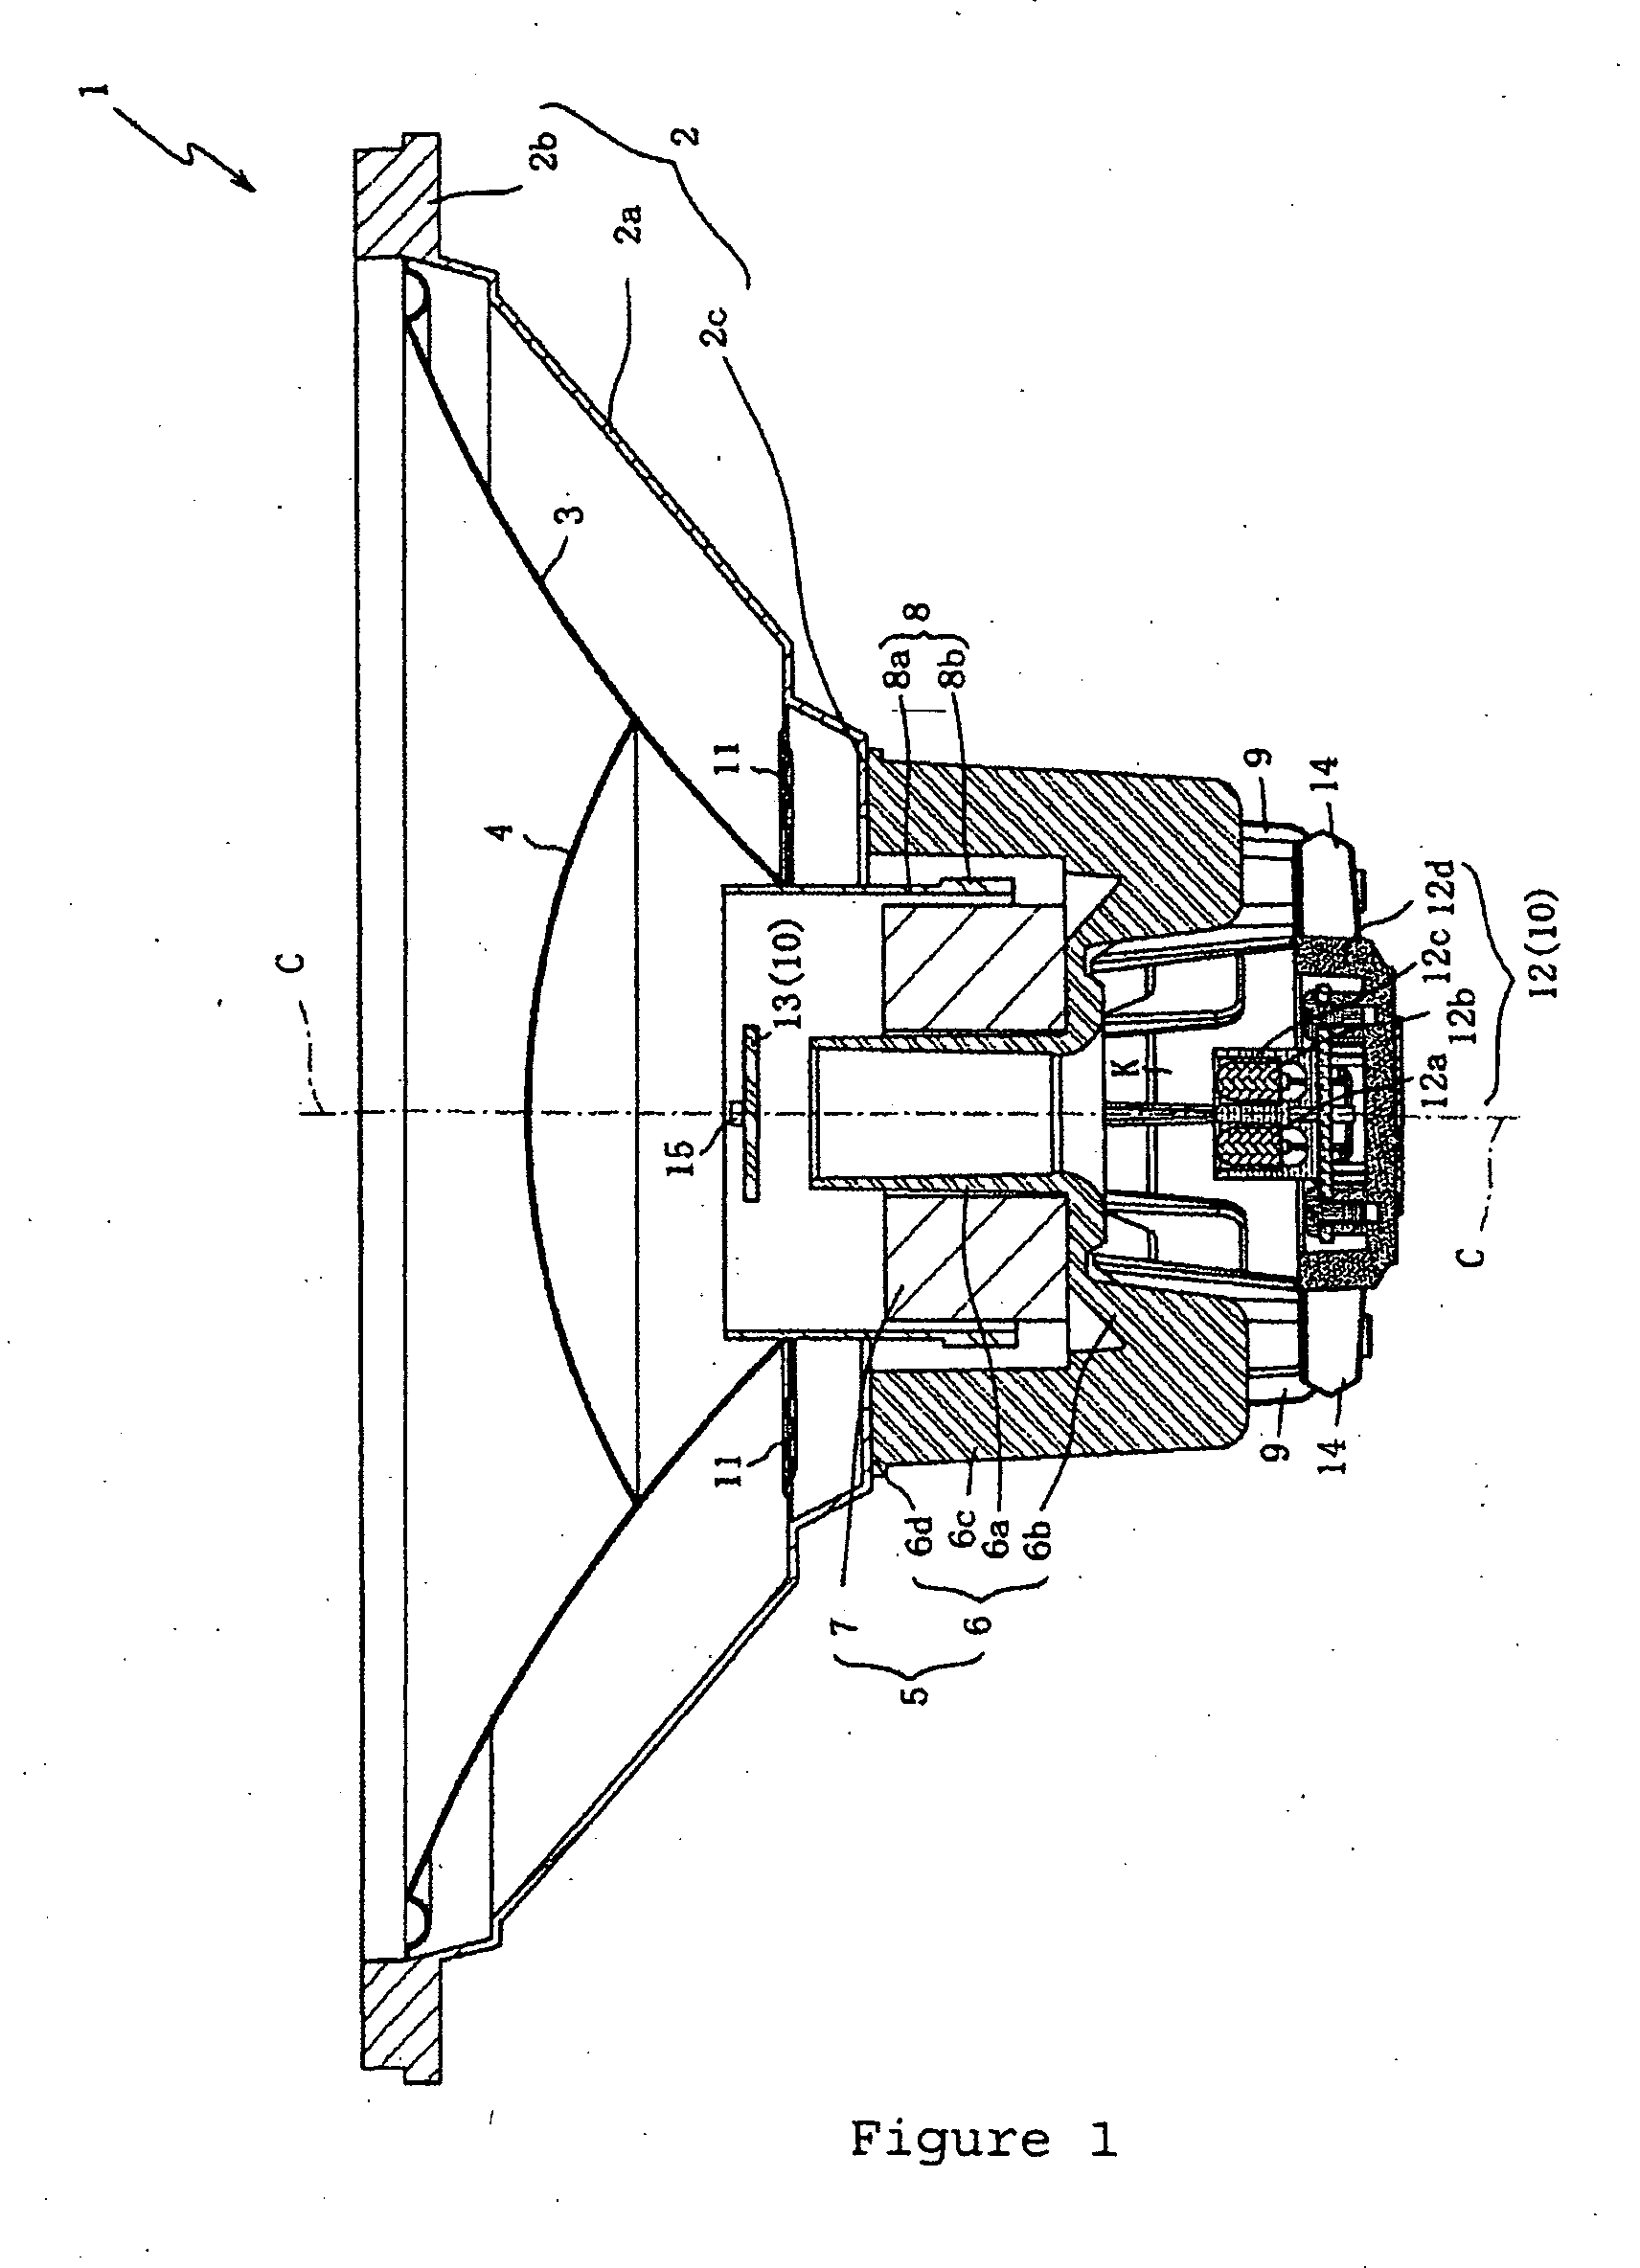 Speaker system with oscillation detection unit